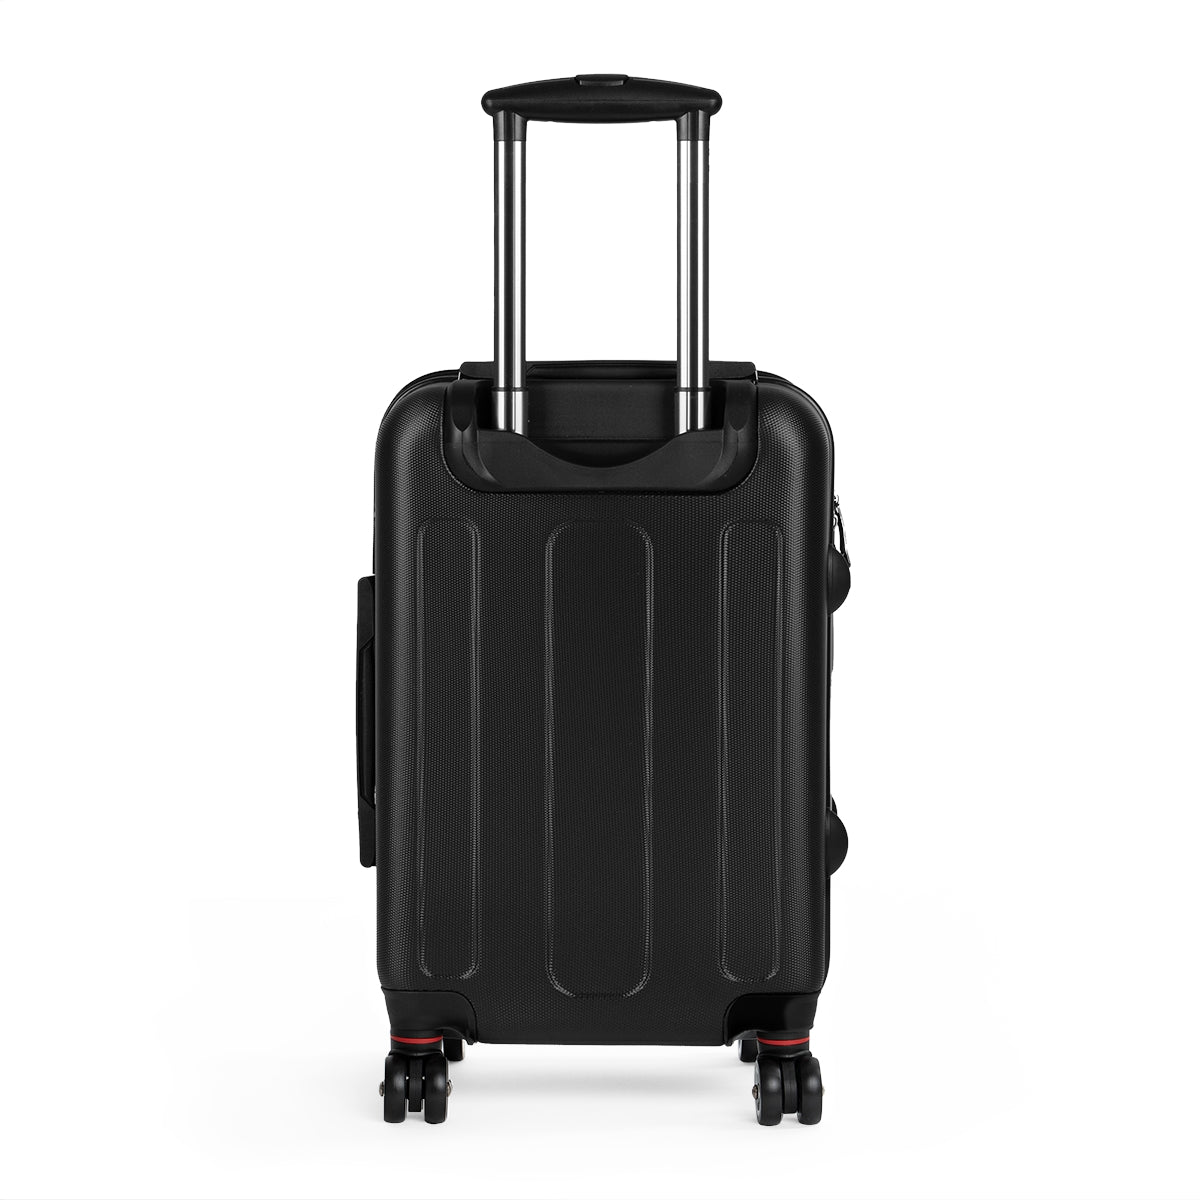 Getrott The Slits Cut 1979 Black Cabin Suitcase Extended Storage Adjustable Telescopic Handle Double wheeled Polycarbonate Hard-shell Built-in Lock-Bags-Geotrott